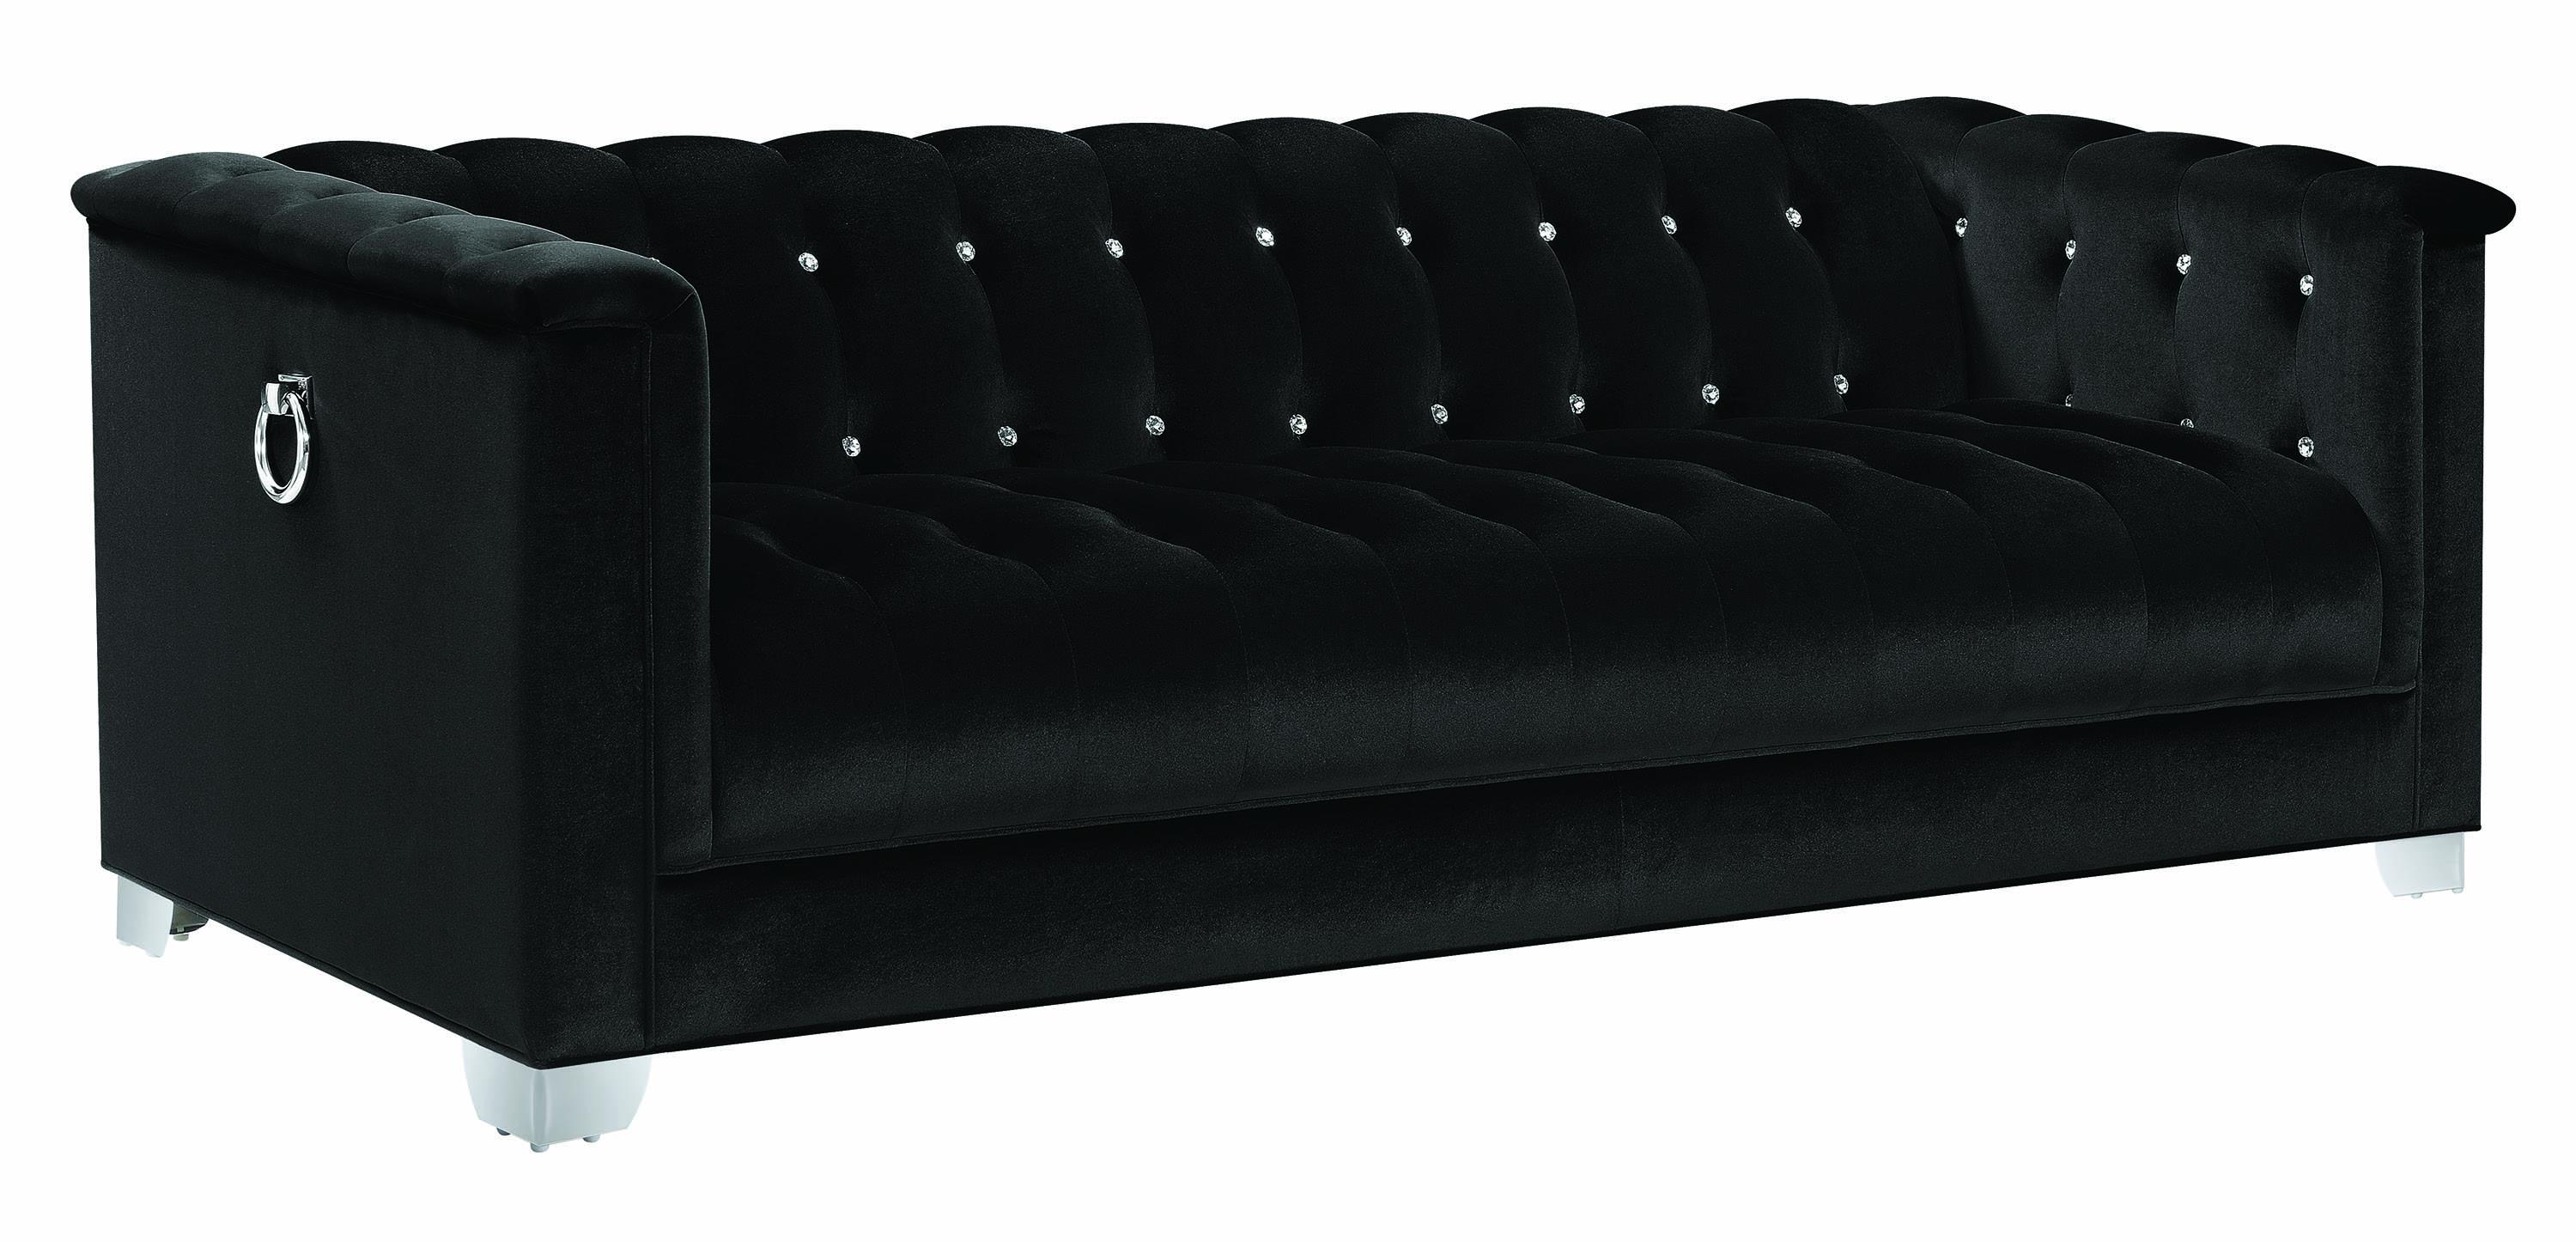 Traditional Tufted sofa Chaviano 505395 in Black Fabric